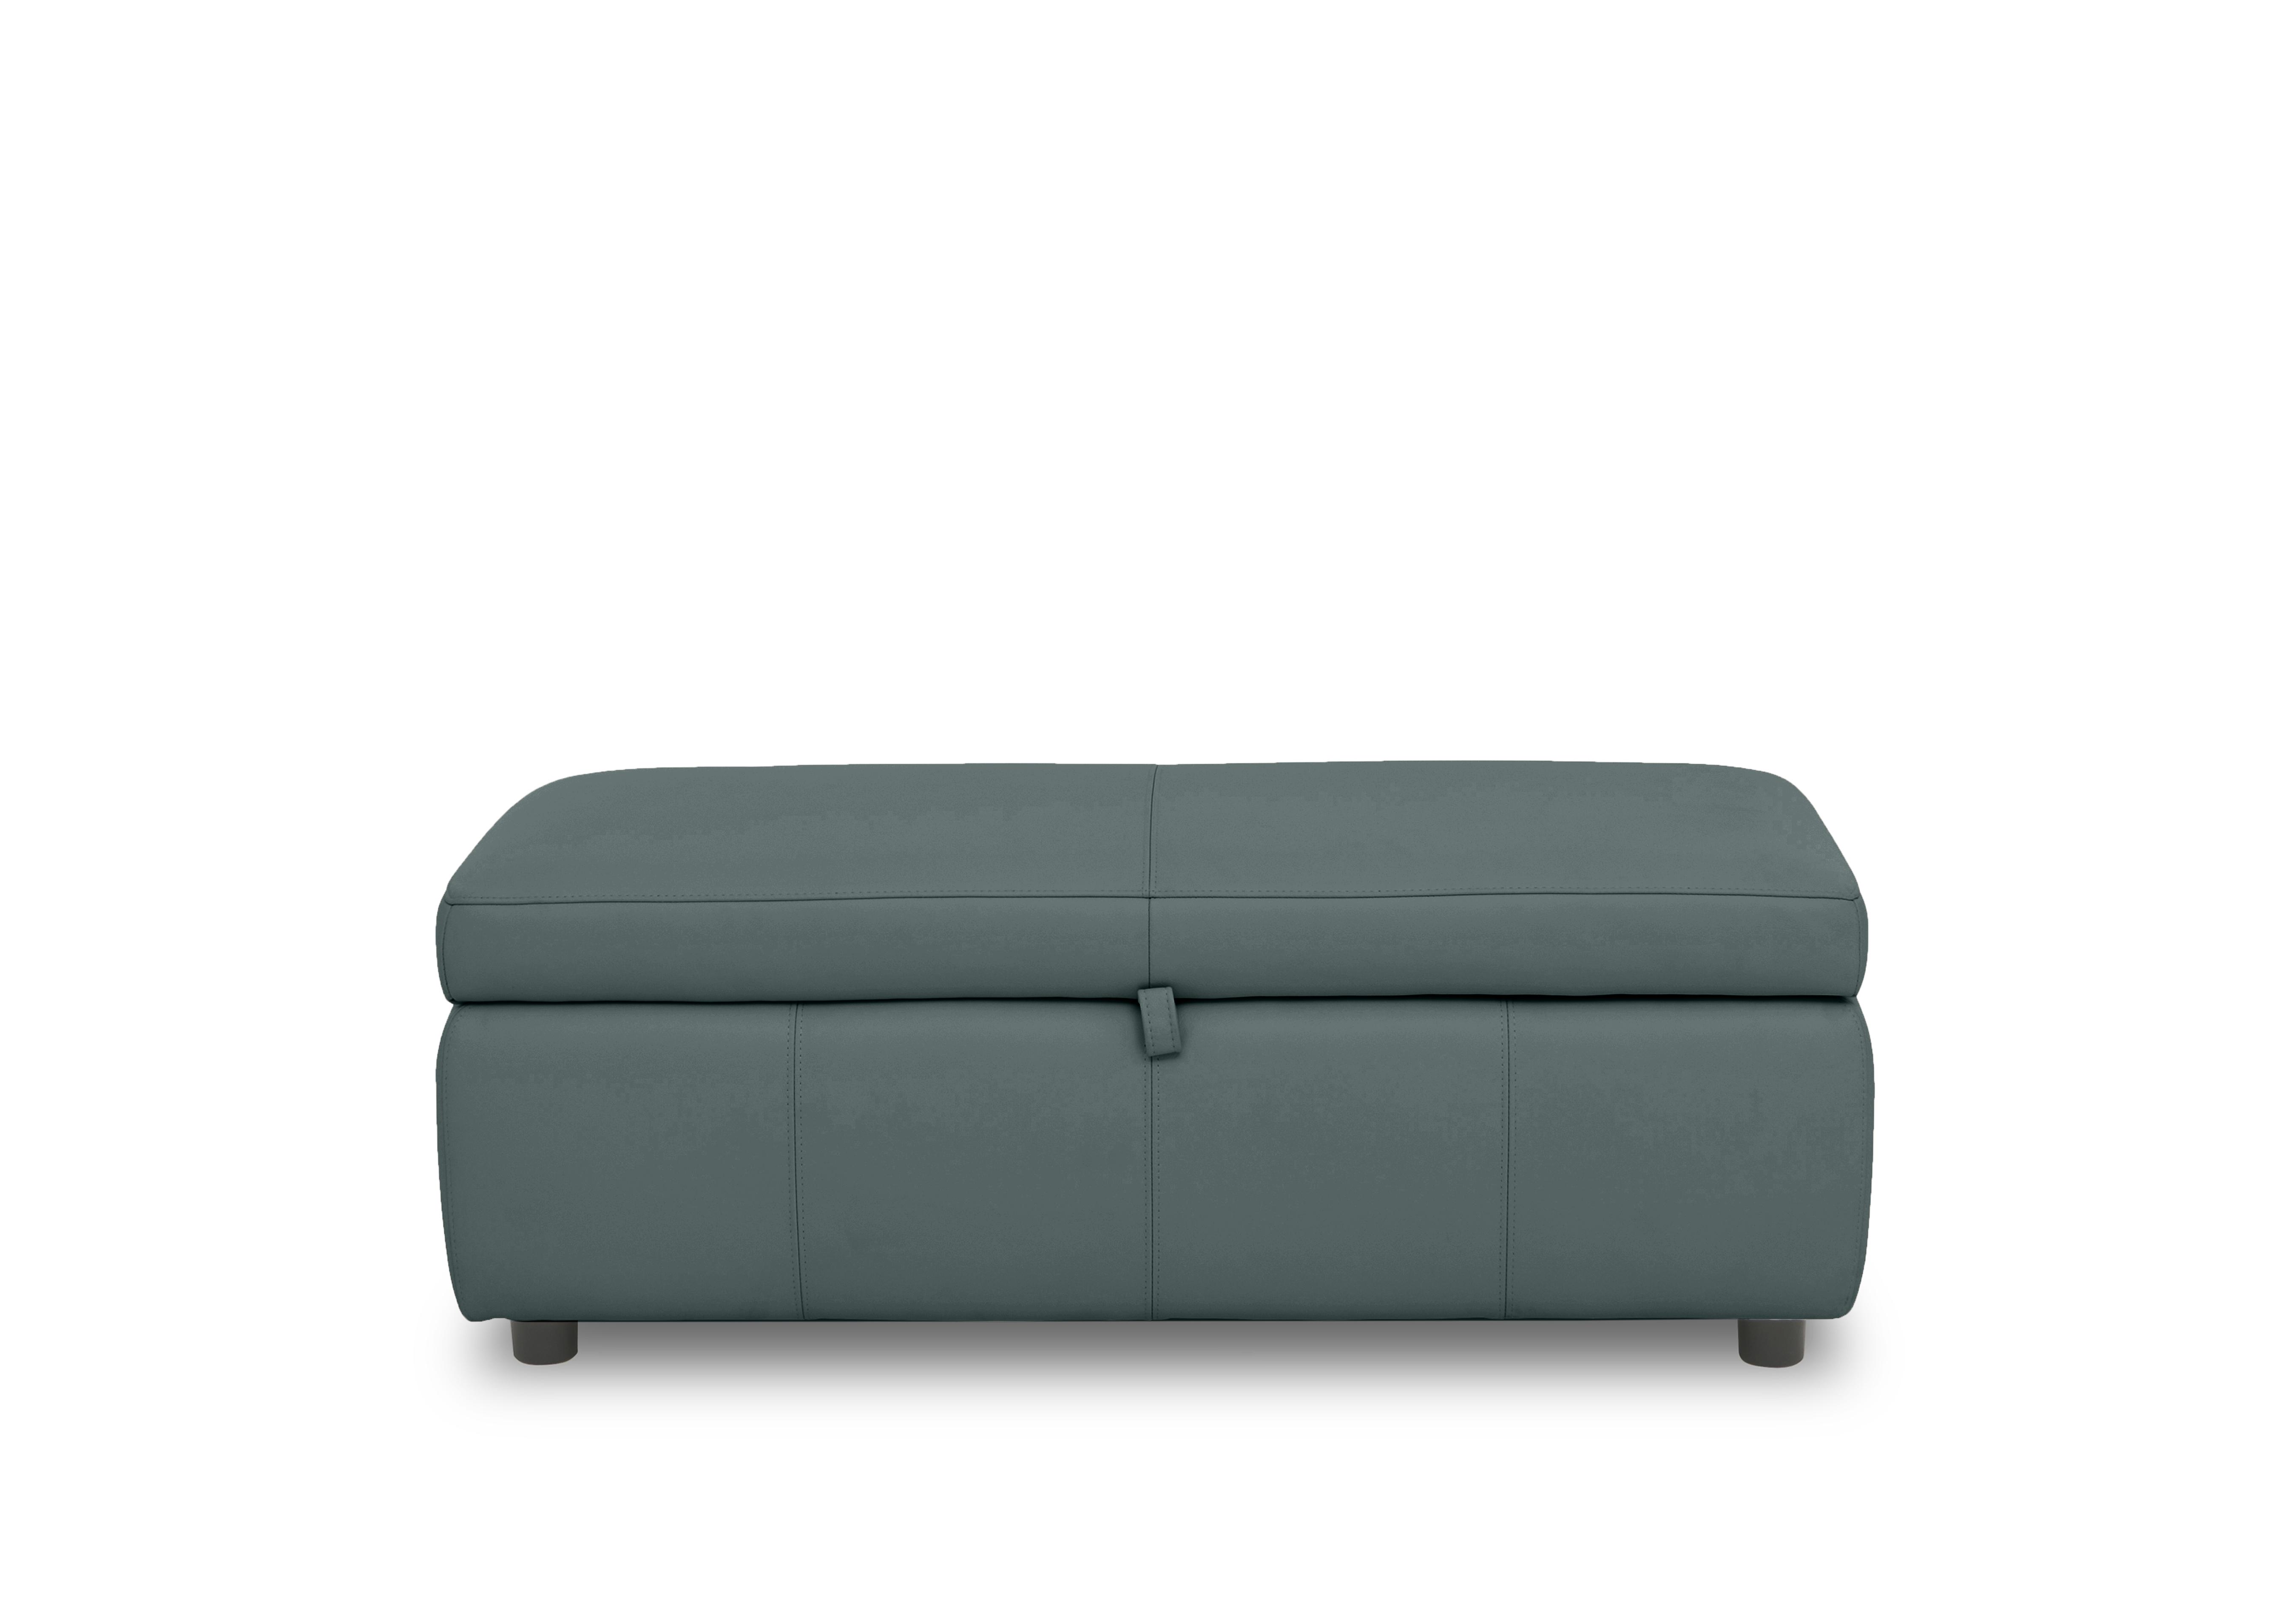 Tyrell 120cm Leather Blanket Box in Bv-301e Lake Green on Furniture Village